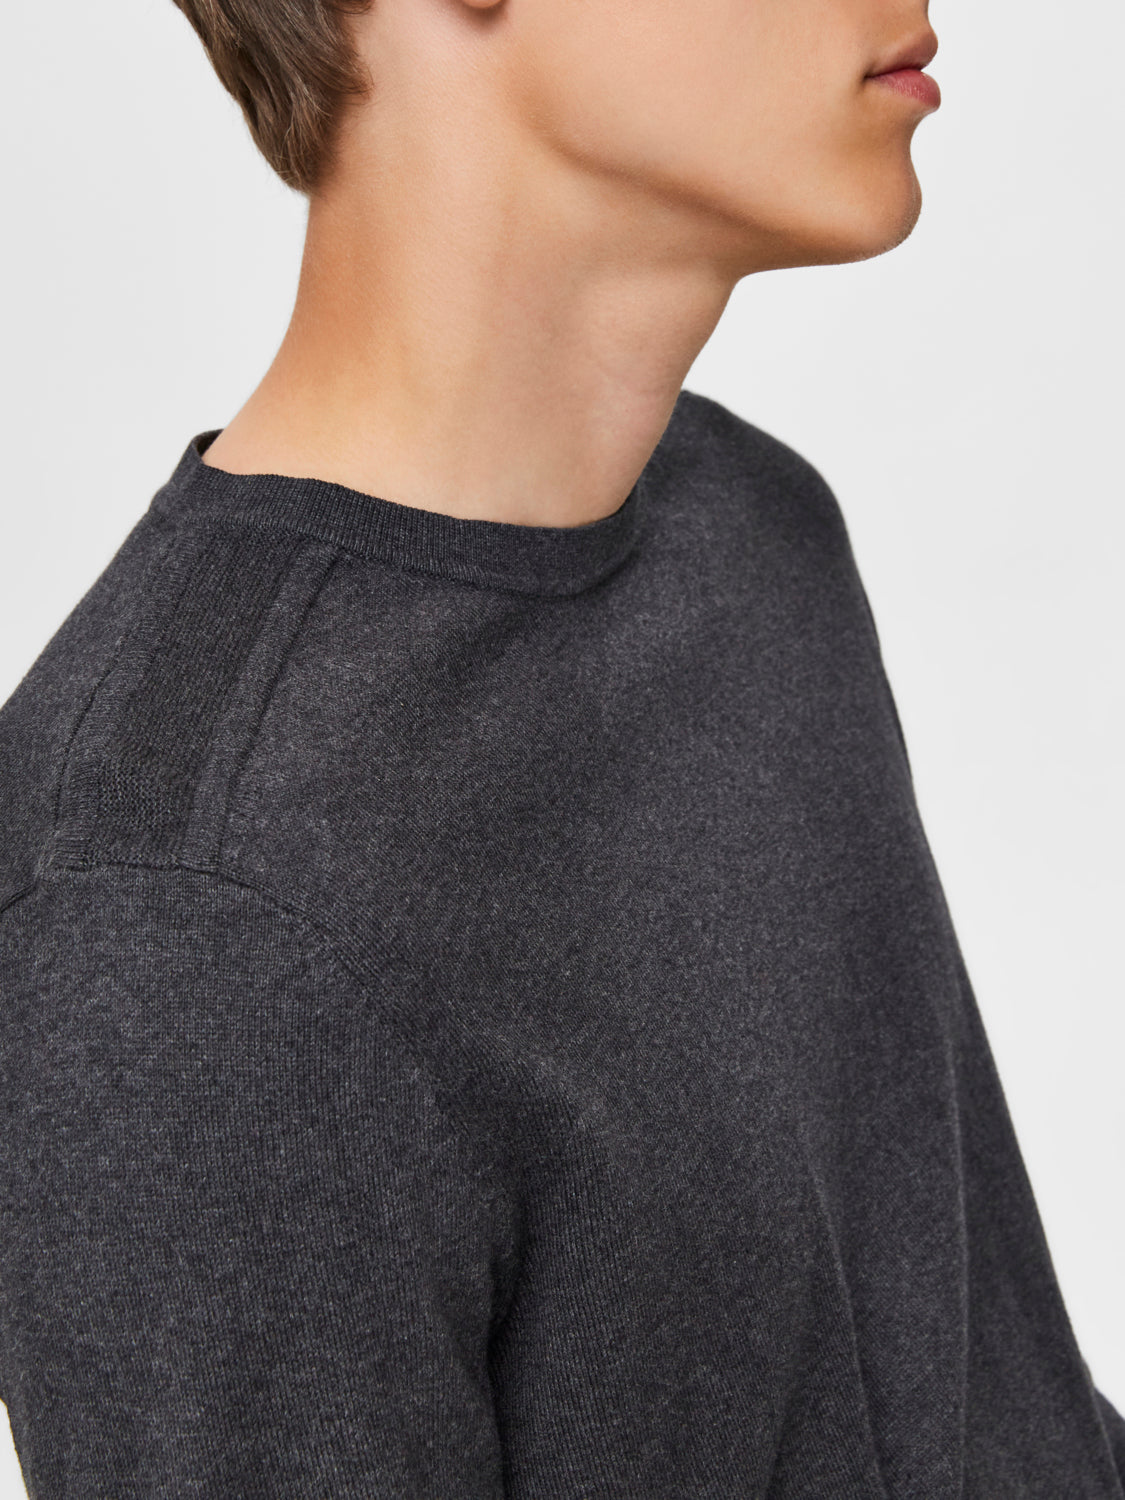 SLHBERG Pullover - Antracit